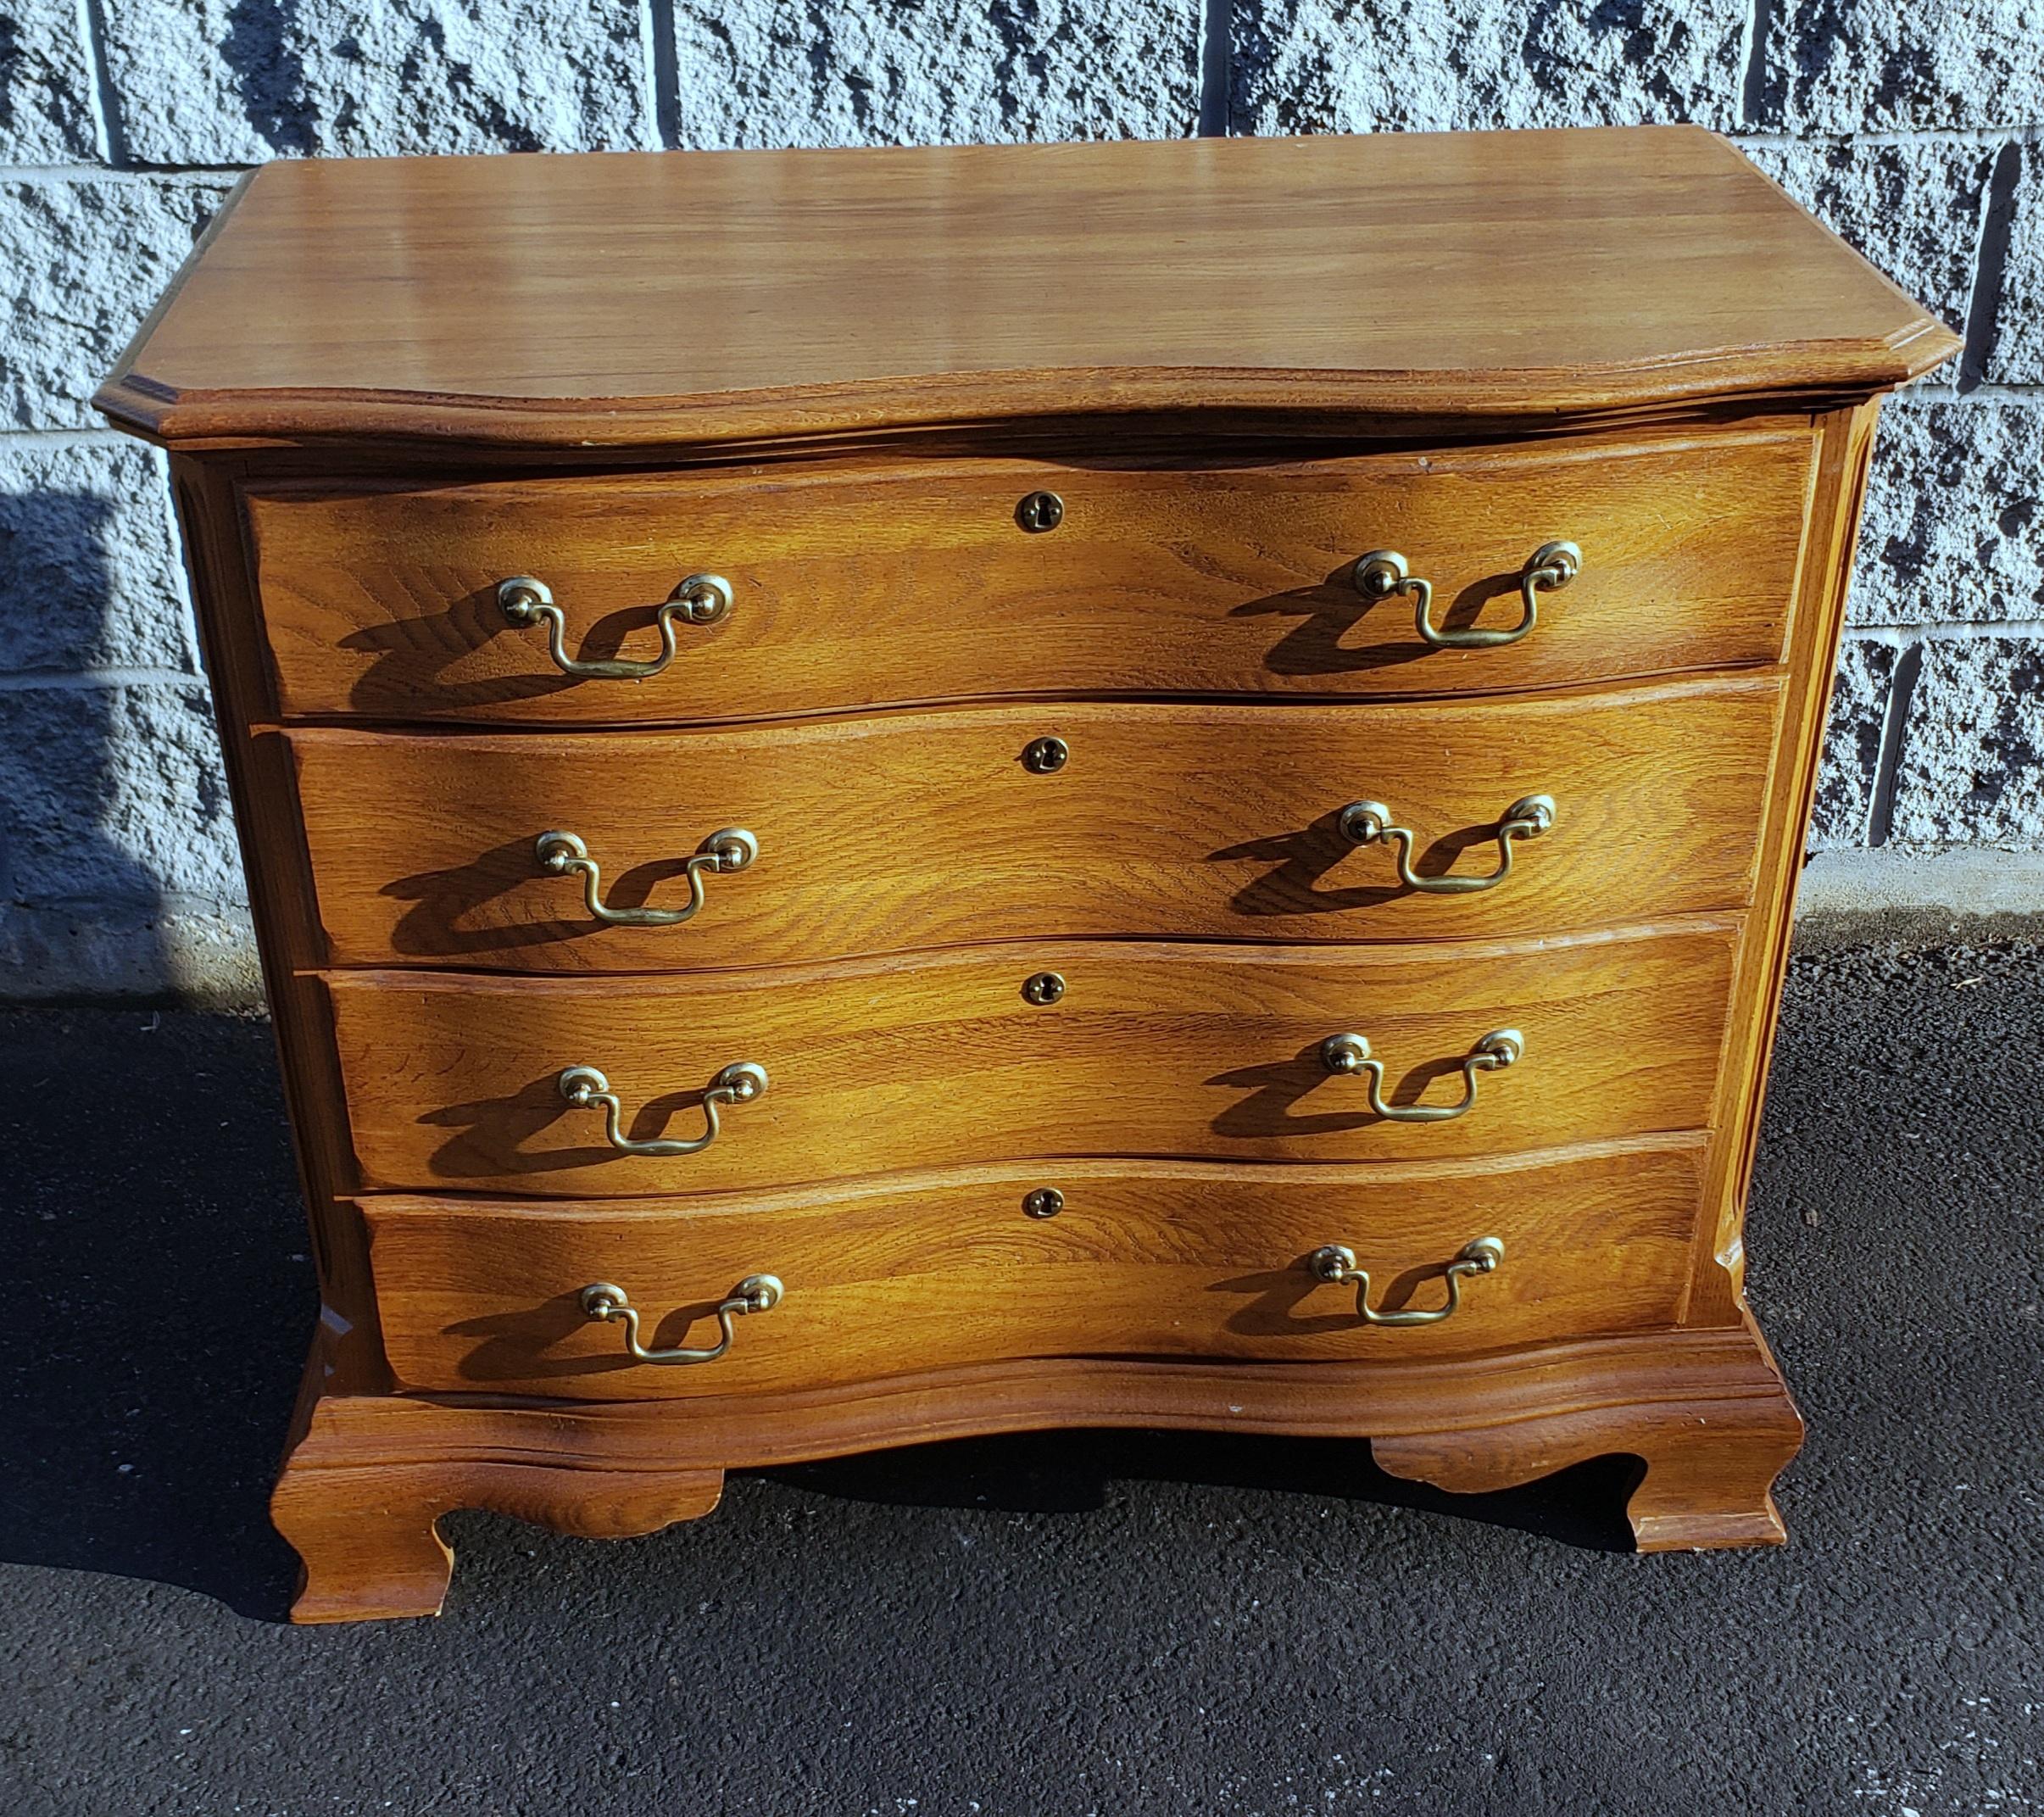 A Late 20th C. Kincaid Chippendale Solid Oak Chest of Drawers in great condition and measuring 37